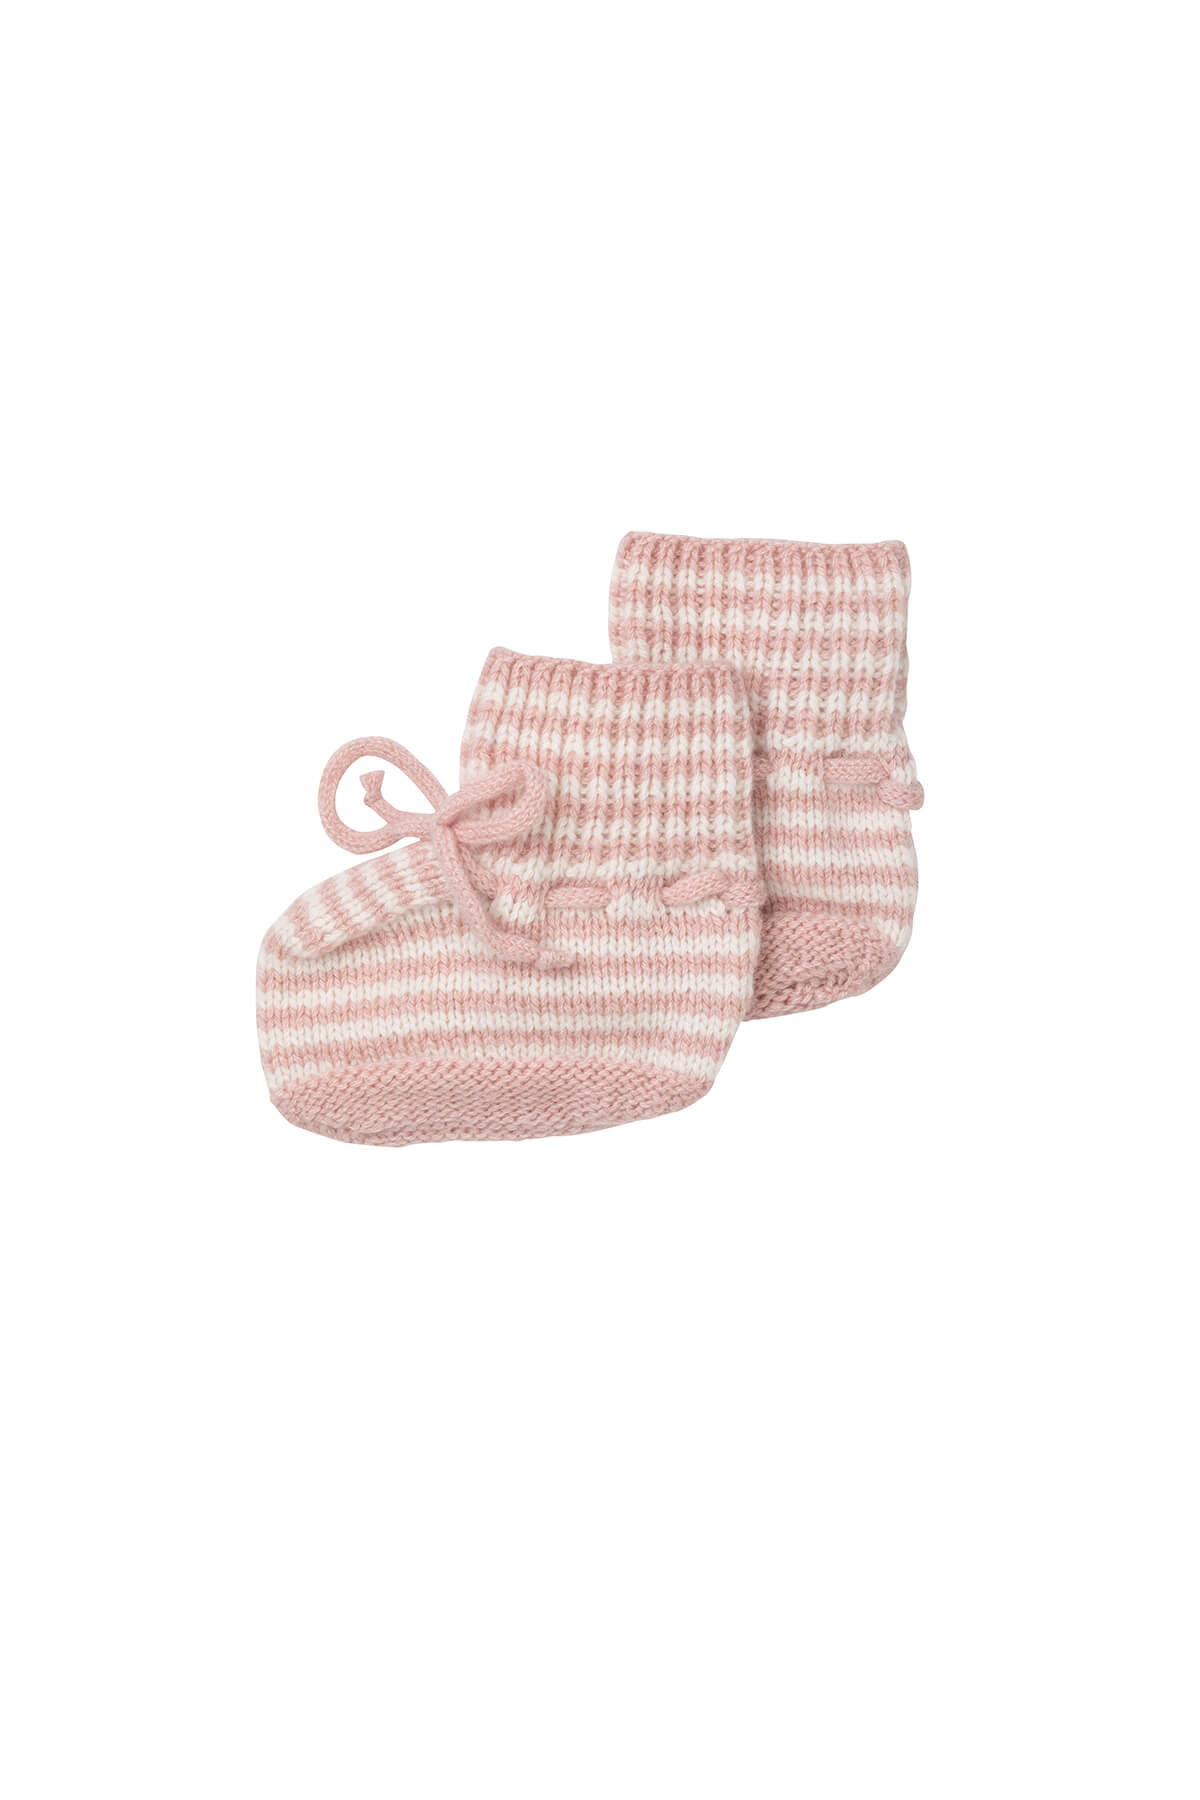 Johnstons of Elgin Hand Knitted Cashmere Baby Booties with crotched trims in Orchid & White on a white background 746333340